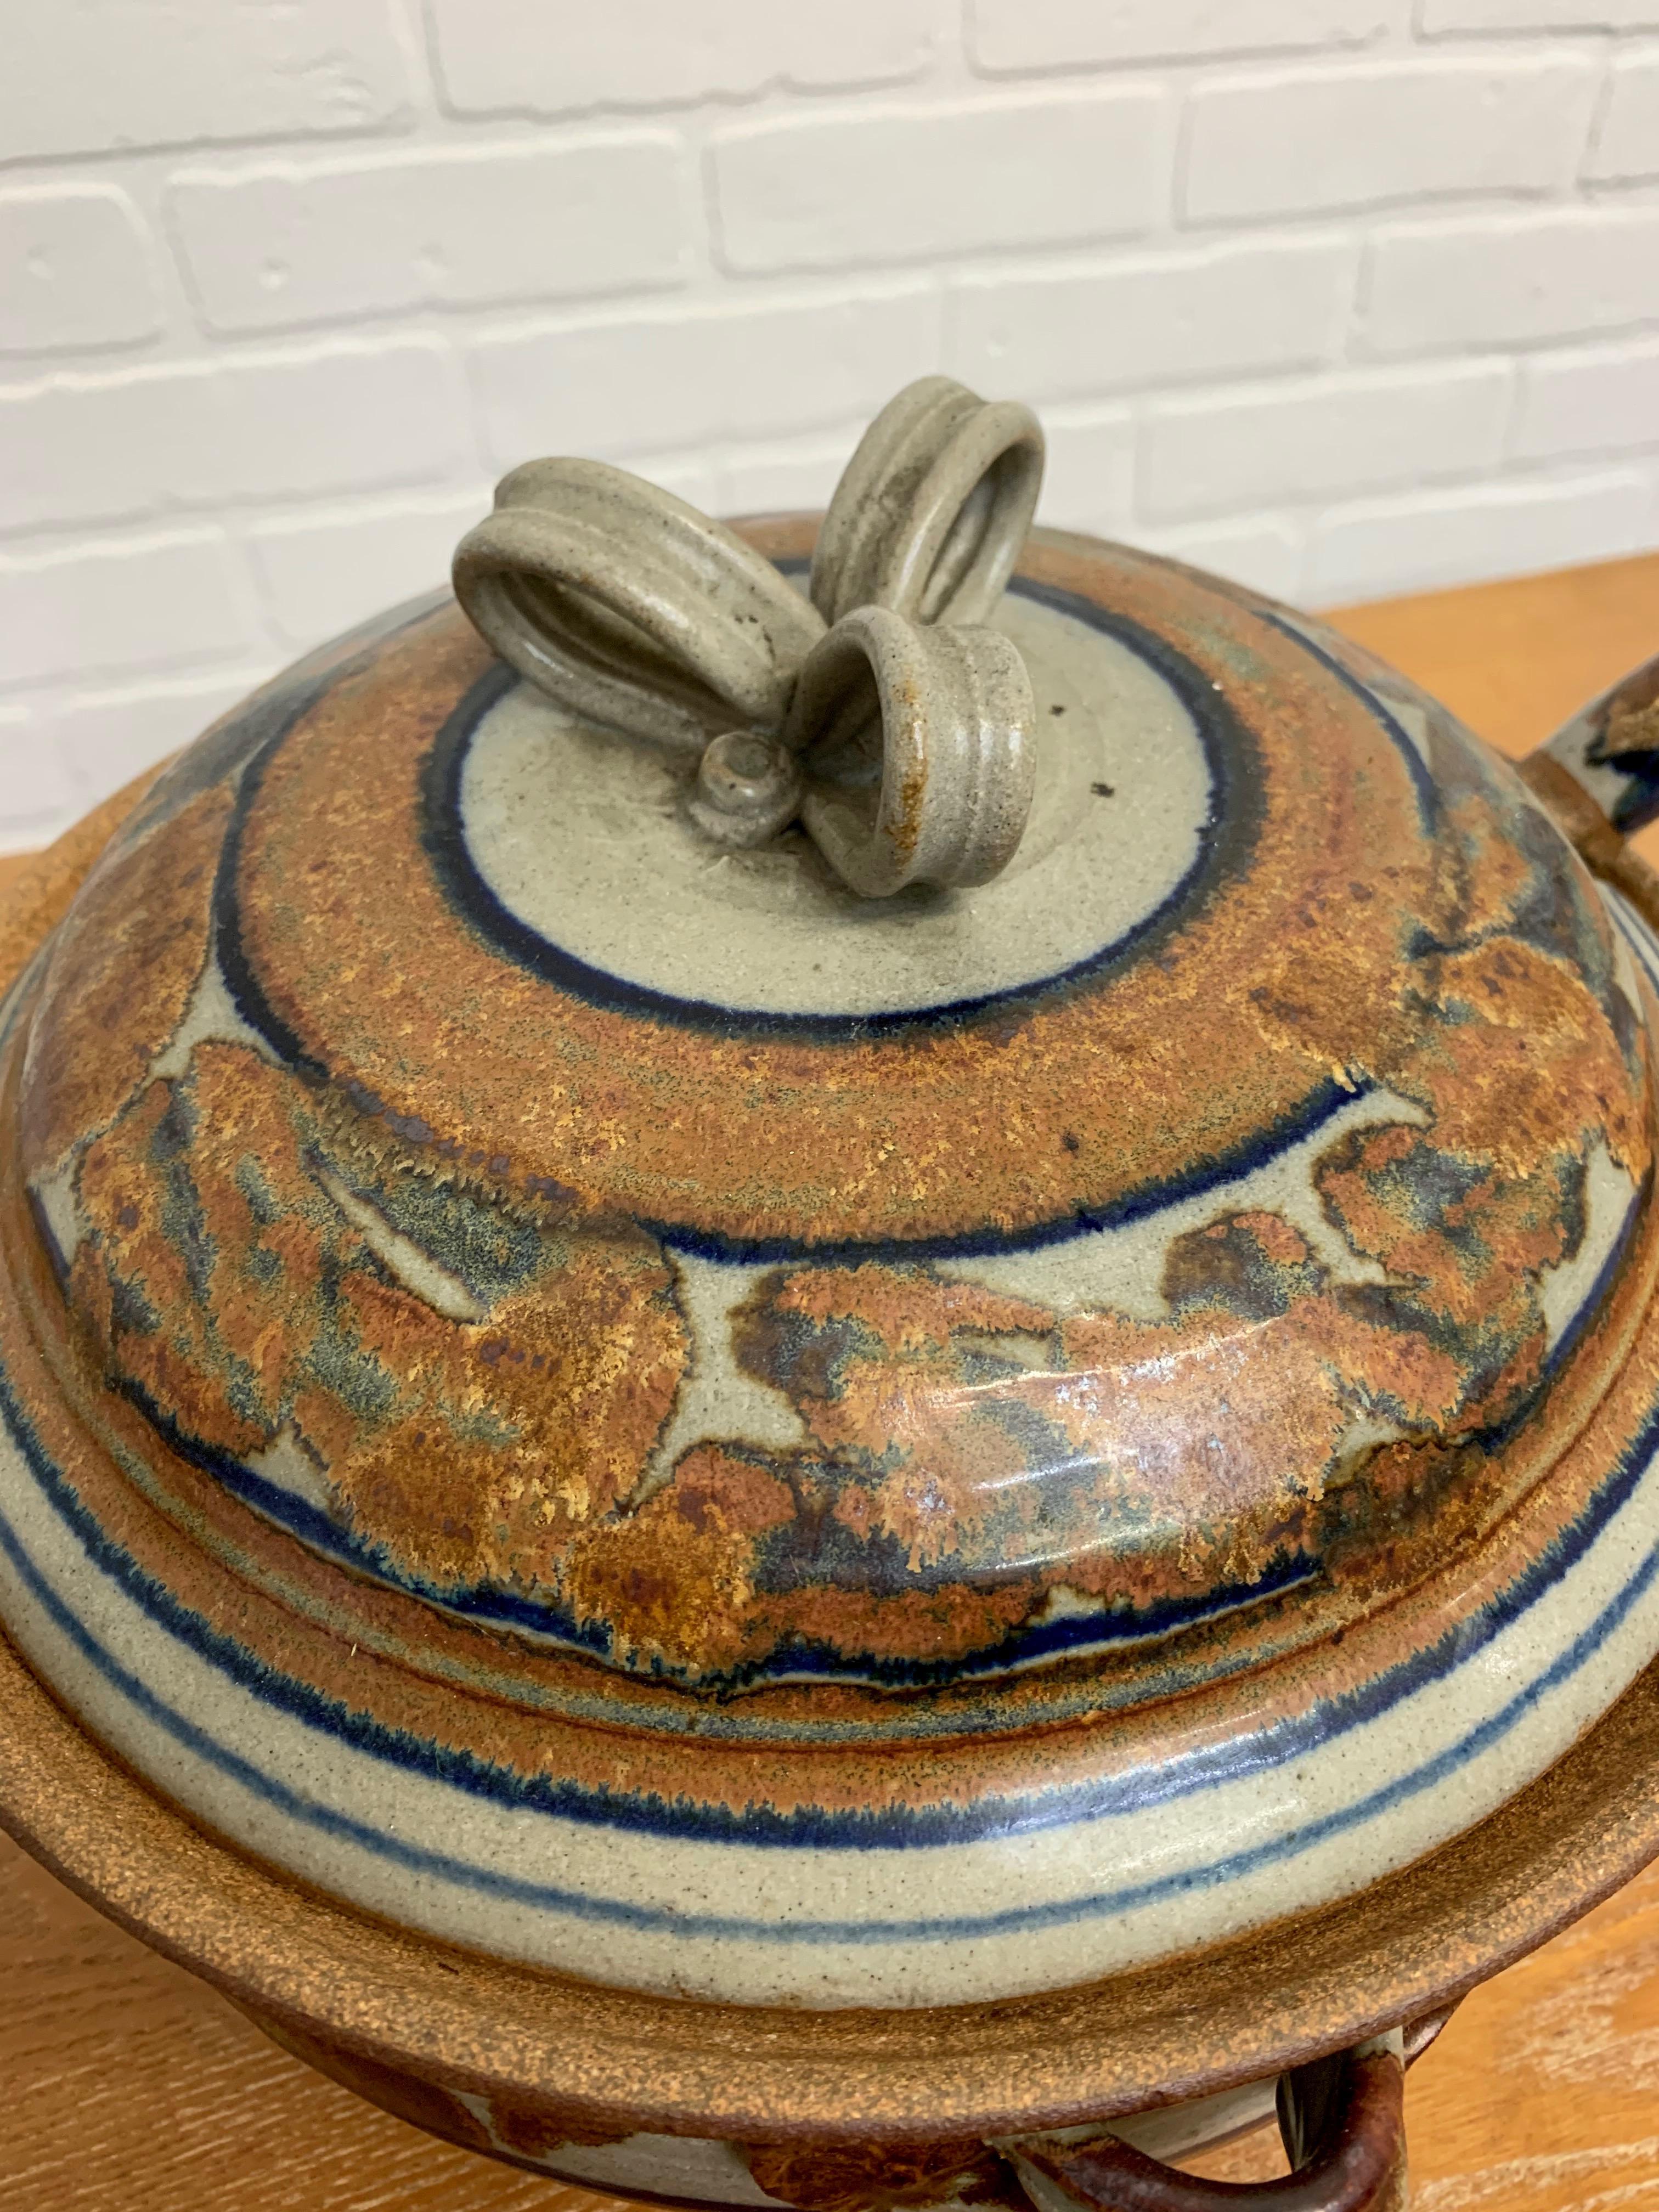 North American 1960s Stoneware Soup Tureen For Sale